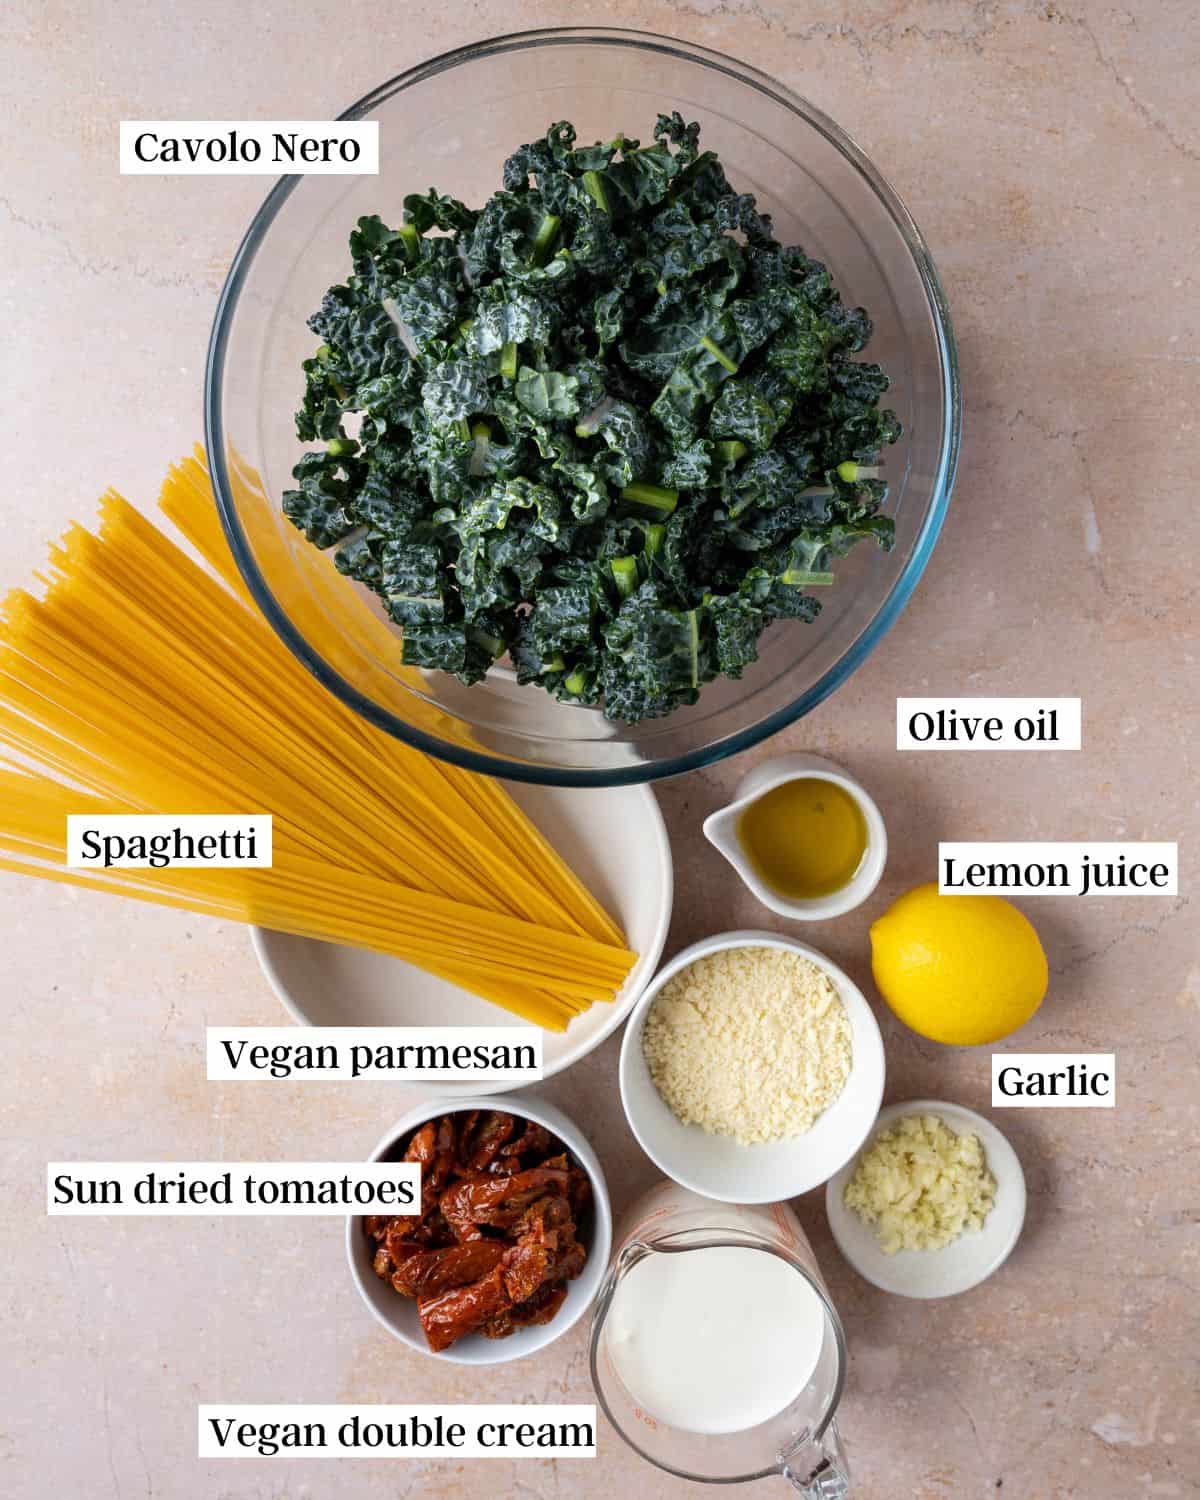 Ingredients for cavolo nero pasta in bowls.